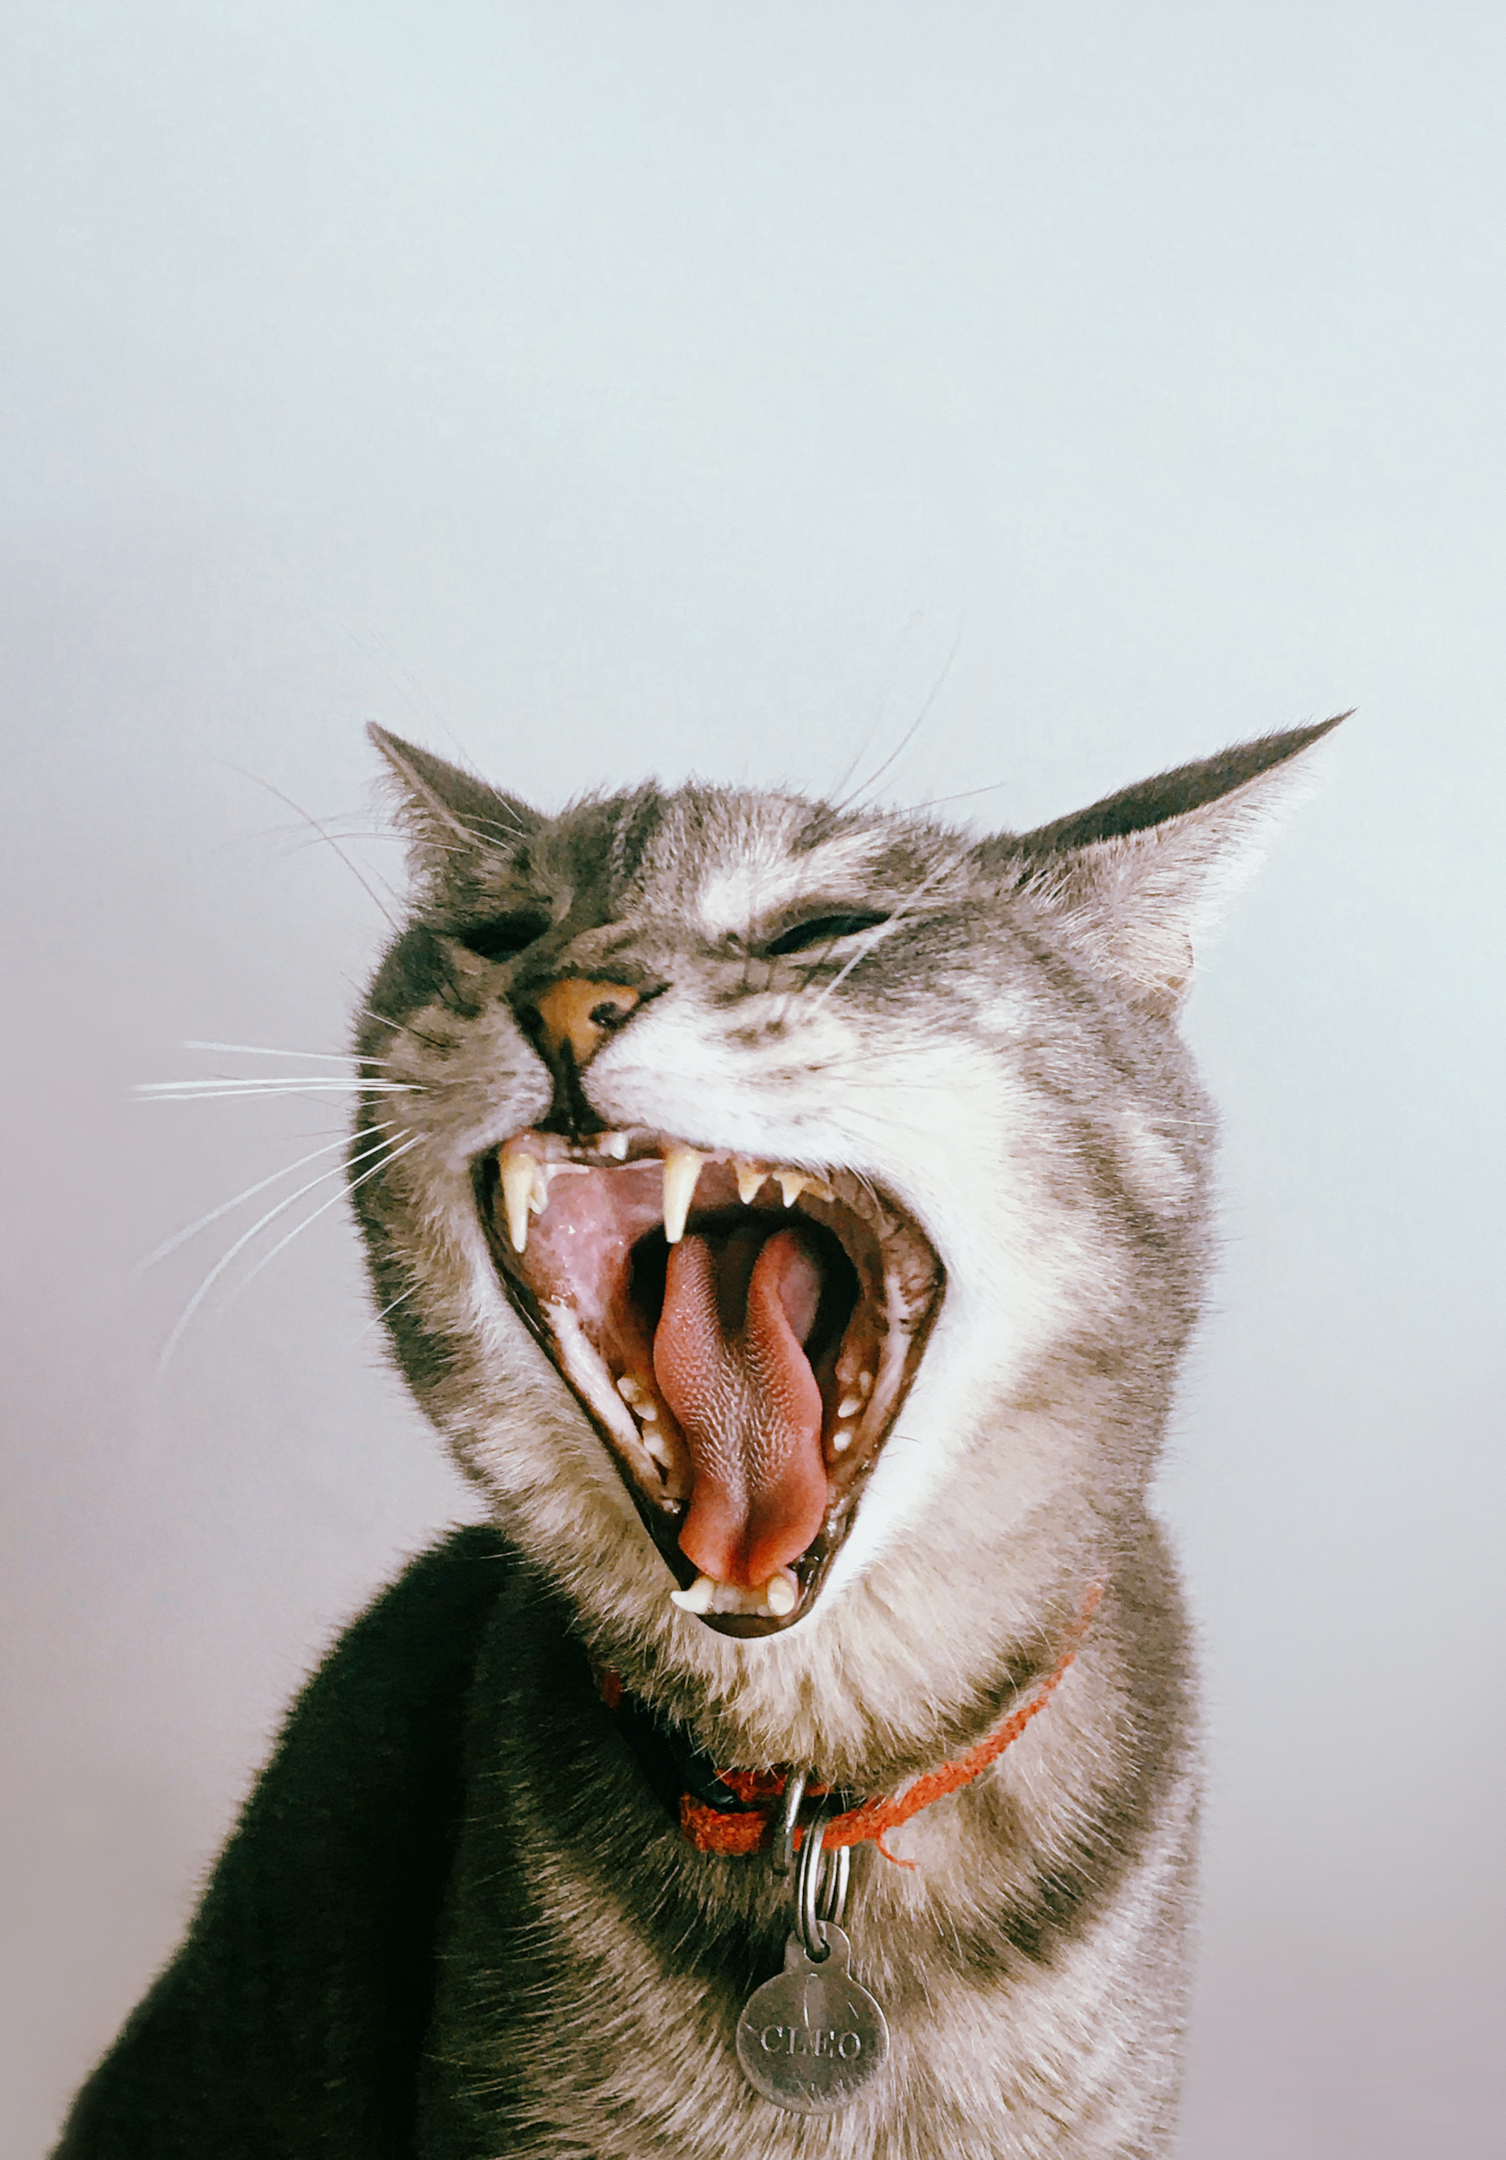 Being a digital marketing copycat always leads to yawns. Audiences connect with your brand for a reason, so put your uniqueness center stage in your social strategy. 